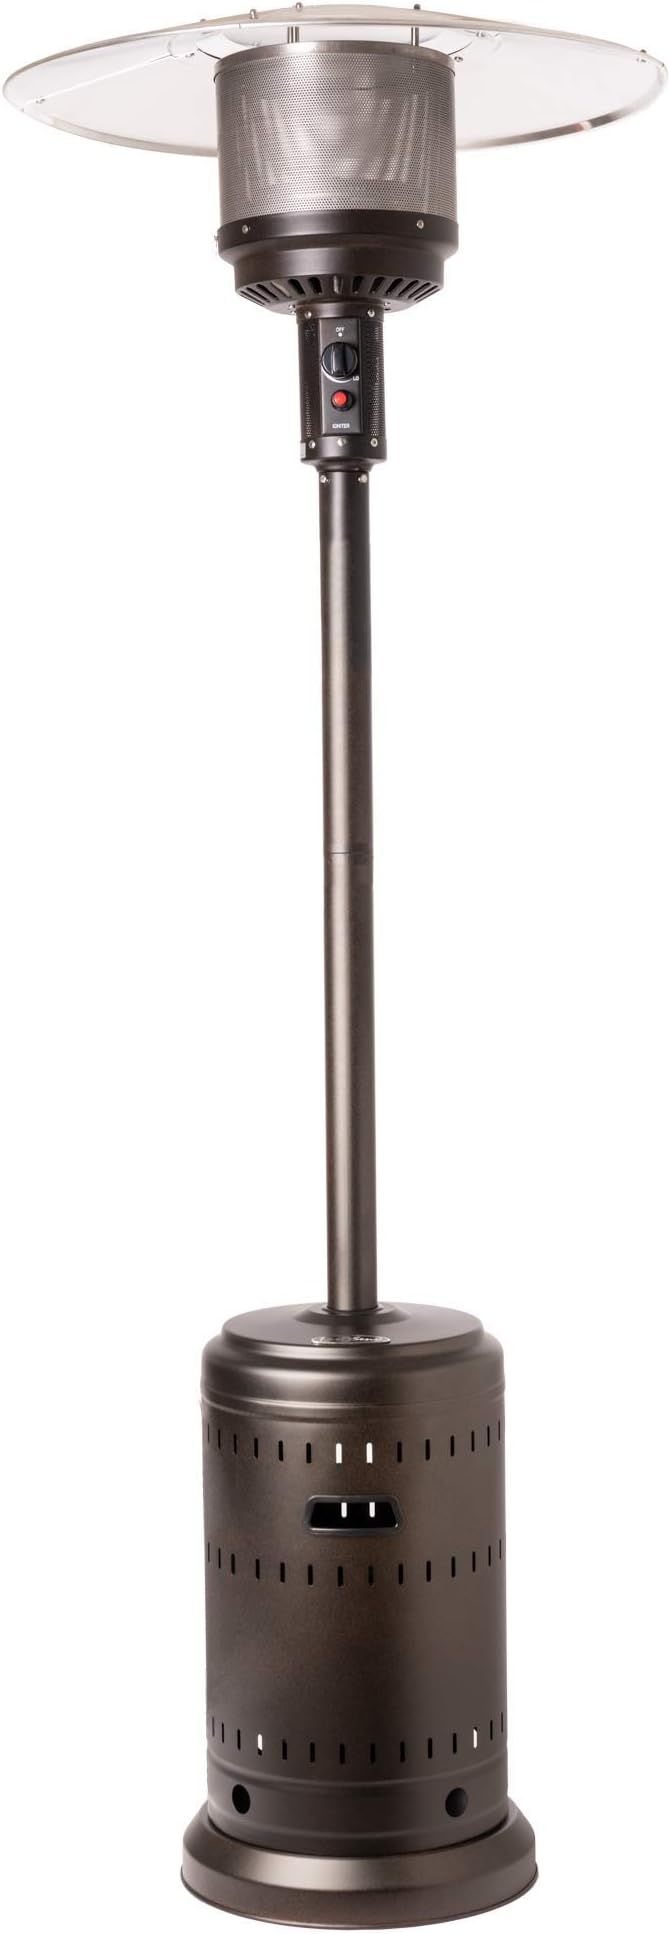 Fire Sense Espresso Finish Commercial Patio Heater with Wheels | Powder Coated Steel Construction... | Amazon (US)